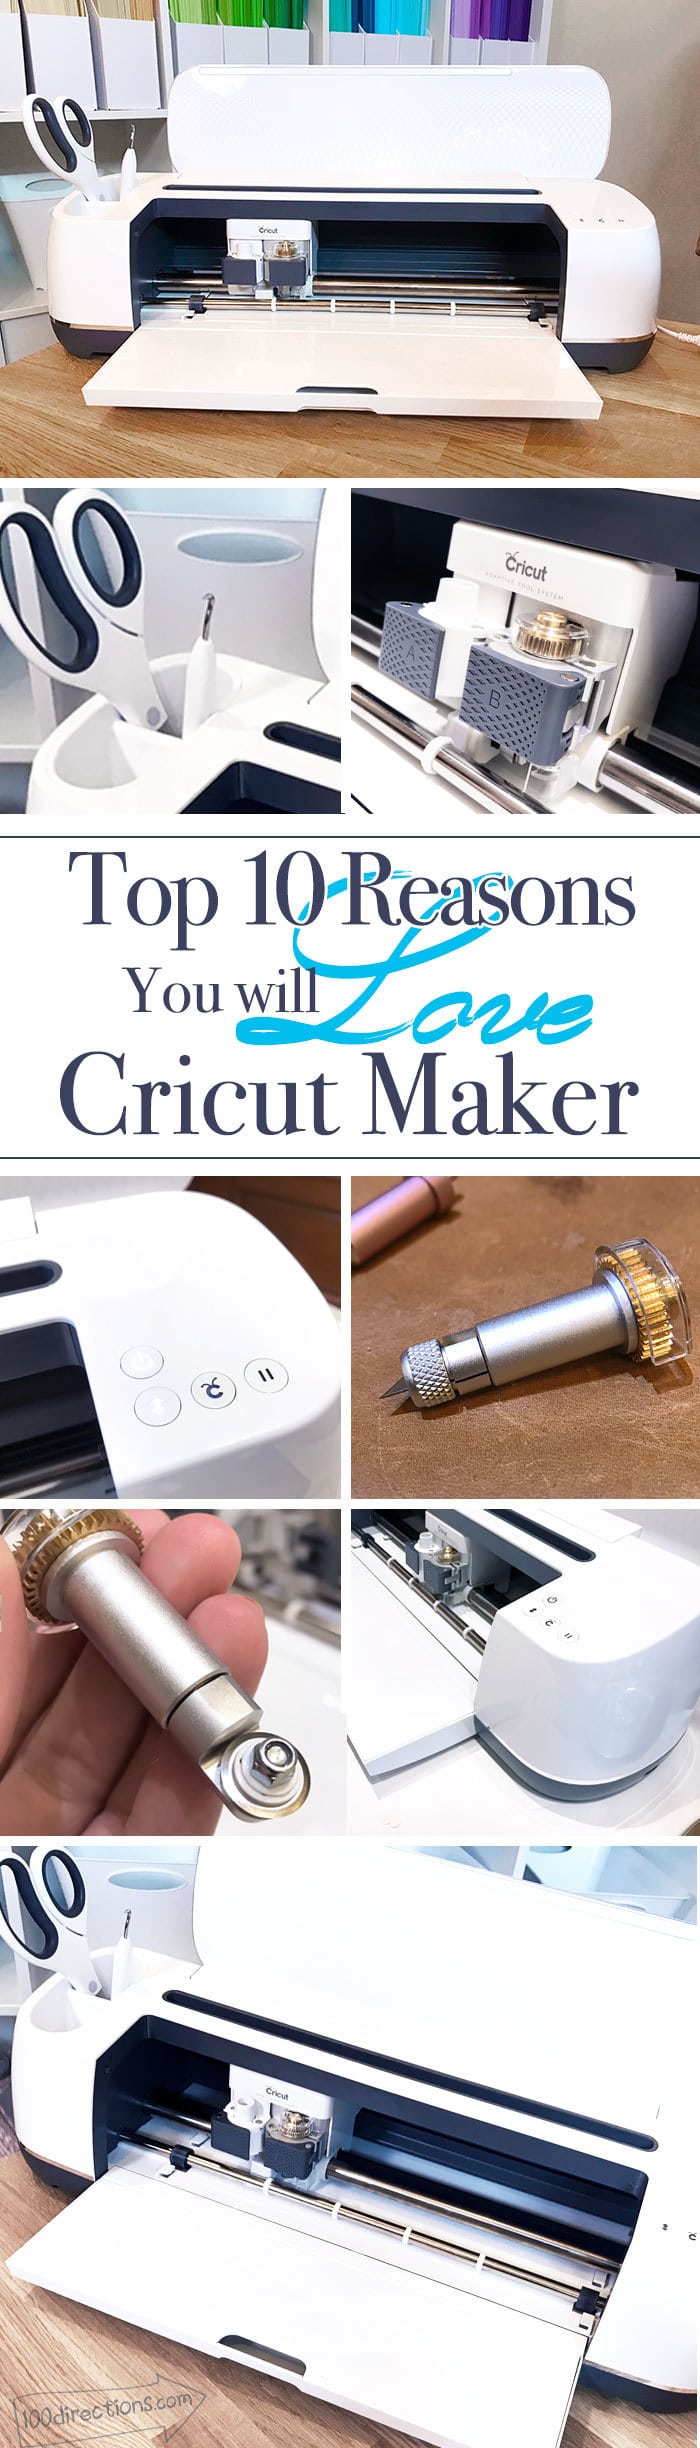 10 Reasons You Will Love the Cricut Maker